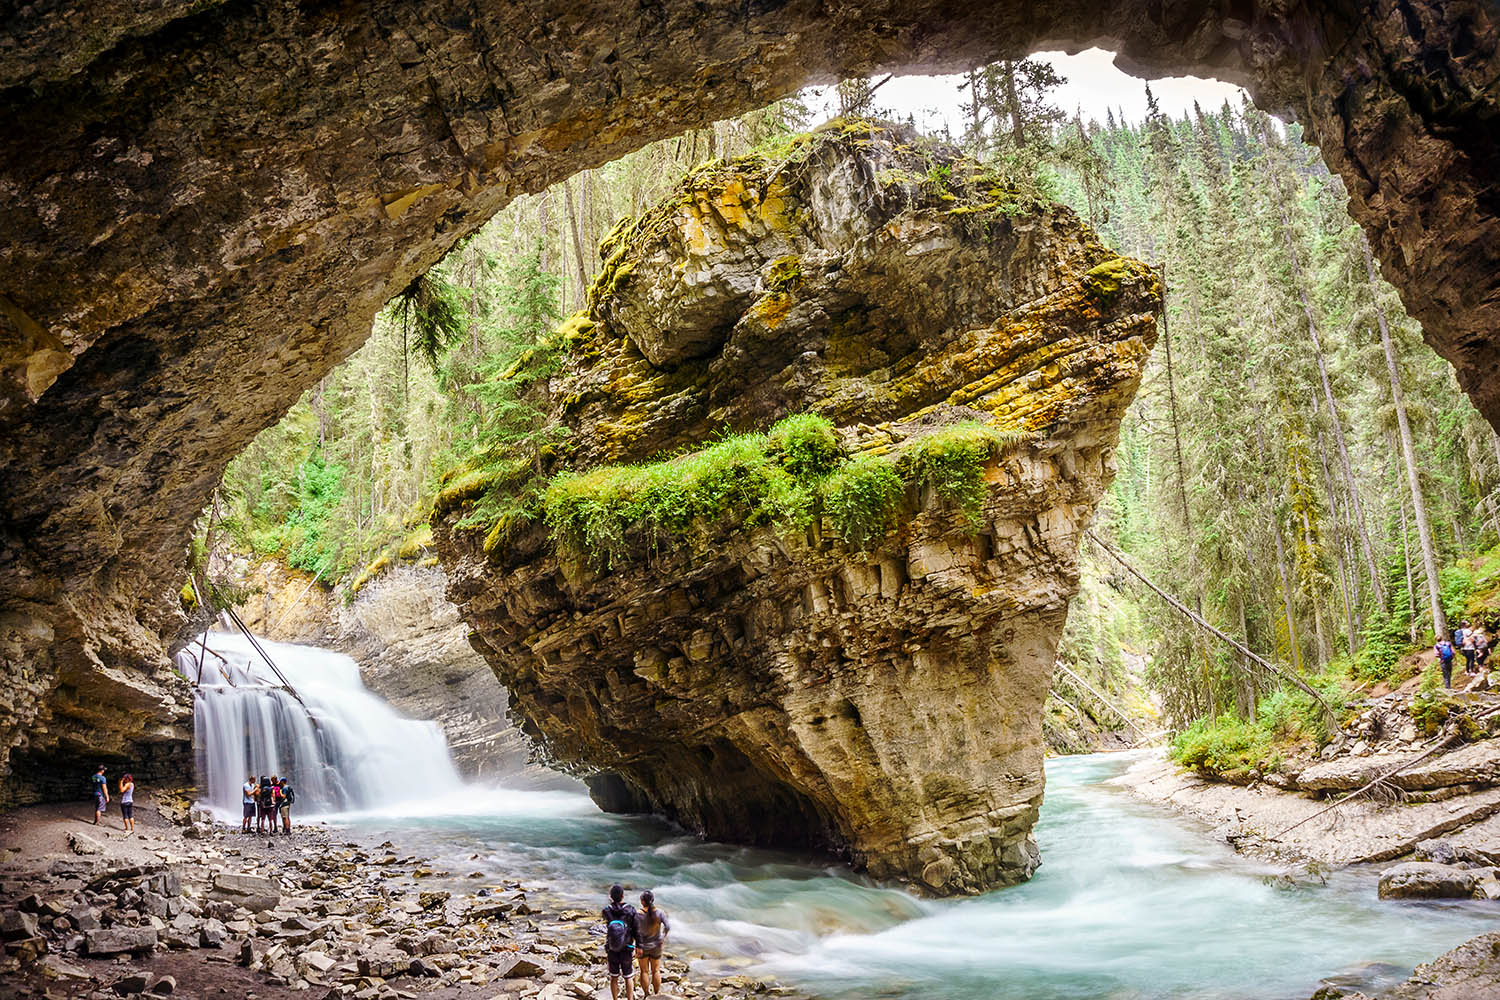 10 of the most stunning spring destinations in Alberta